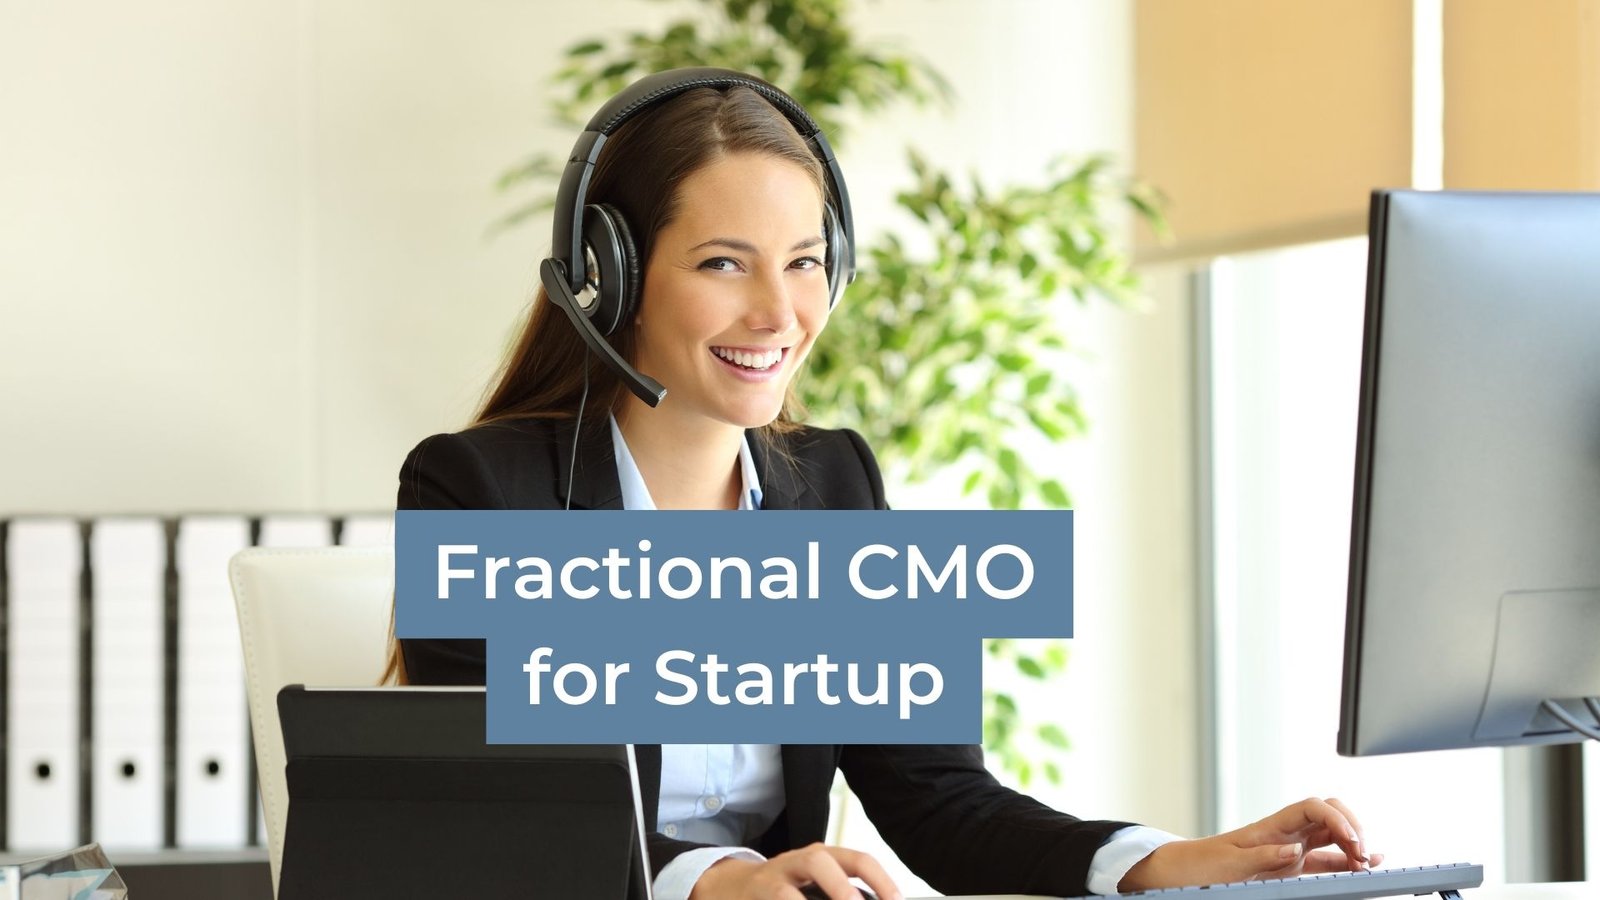 Fractional CMO for Startup